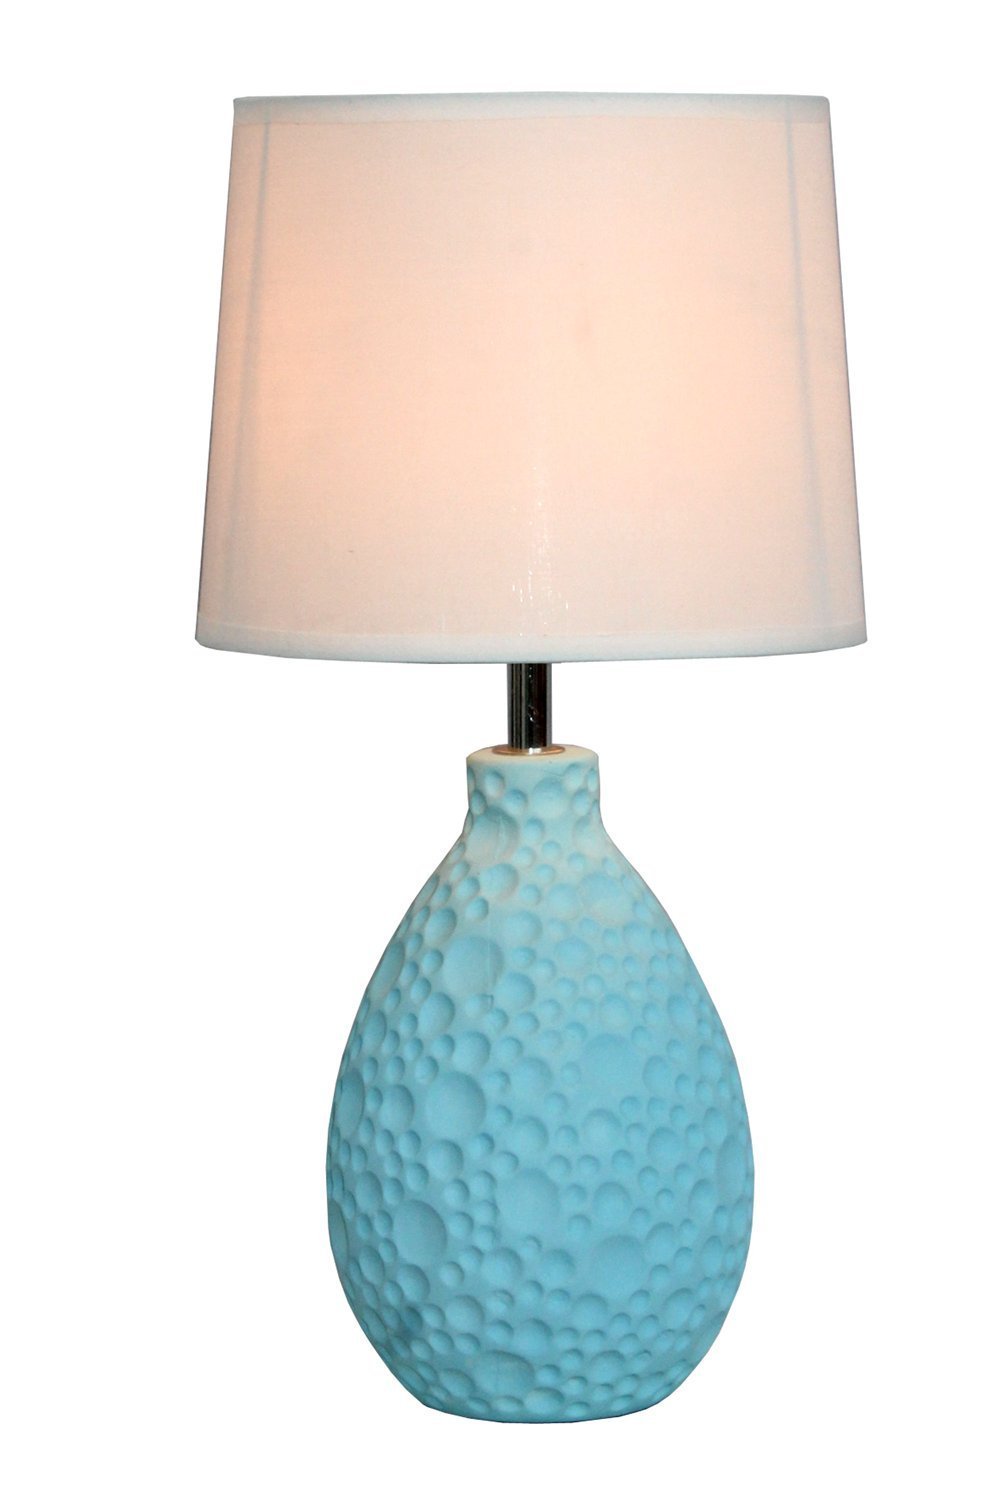 Simple Designs LT2003-BLU Textured Stucco Ceramic Oval White Fabric Shade Table Lamp, Blue